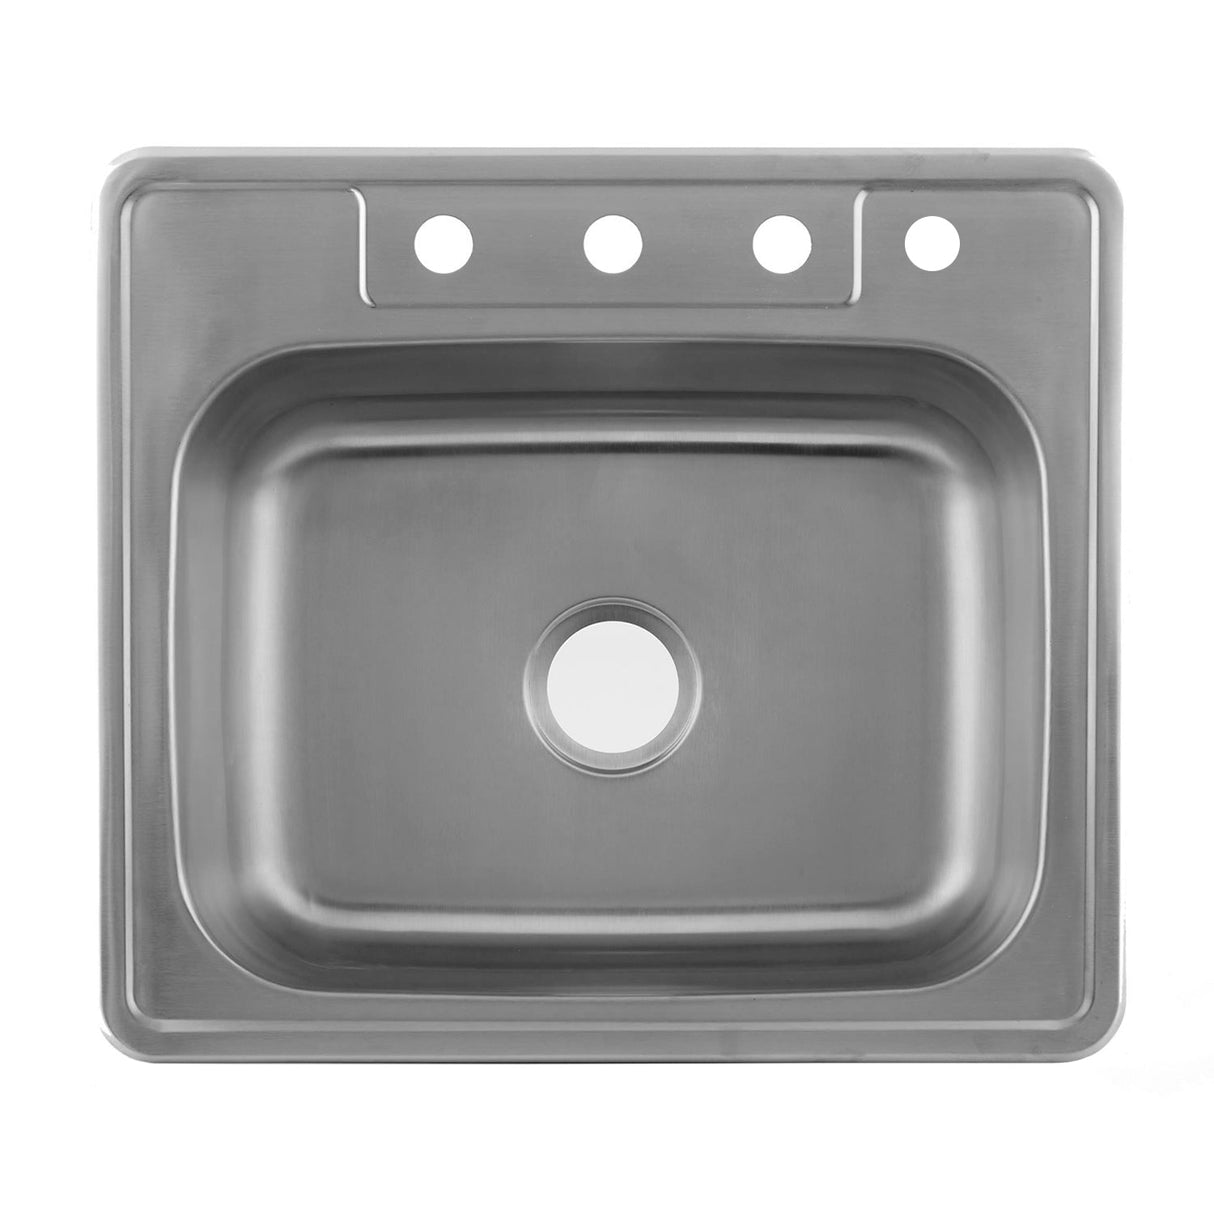 DAX Stainless Steel Single Bowl Top Mount Kitchen Sink, Brushed Stainless Steel DAX-OM-2522